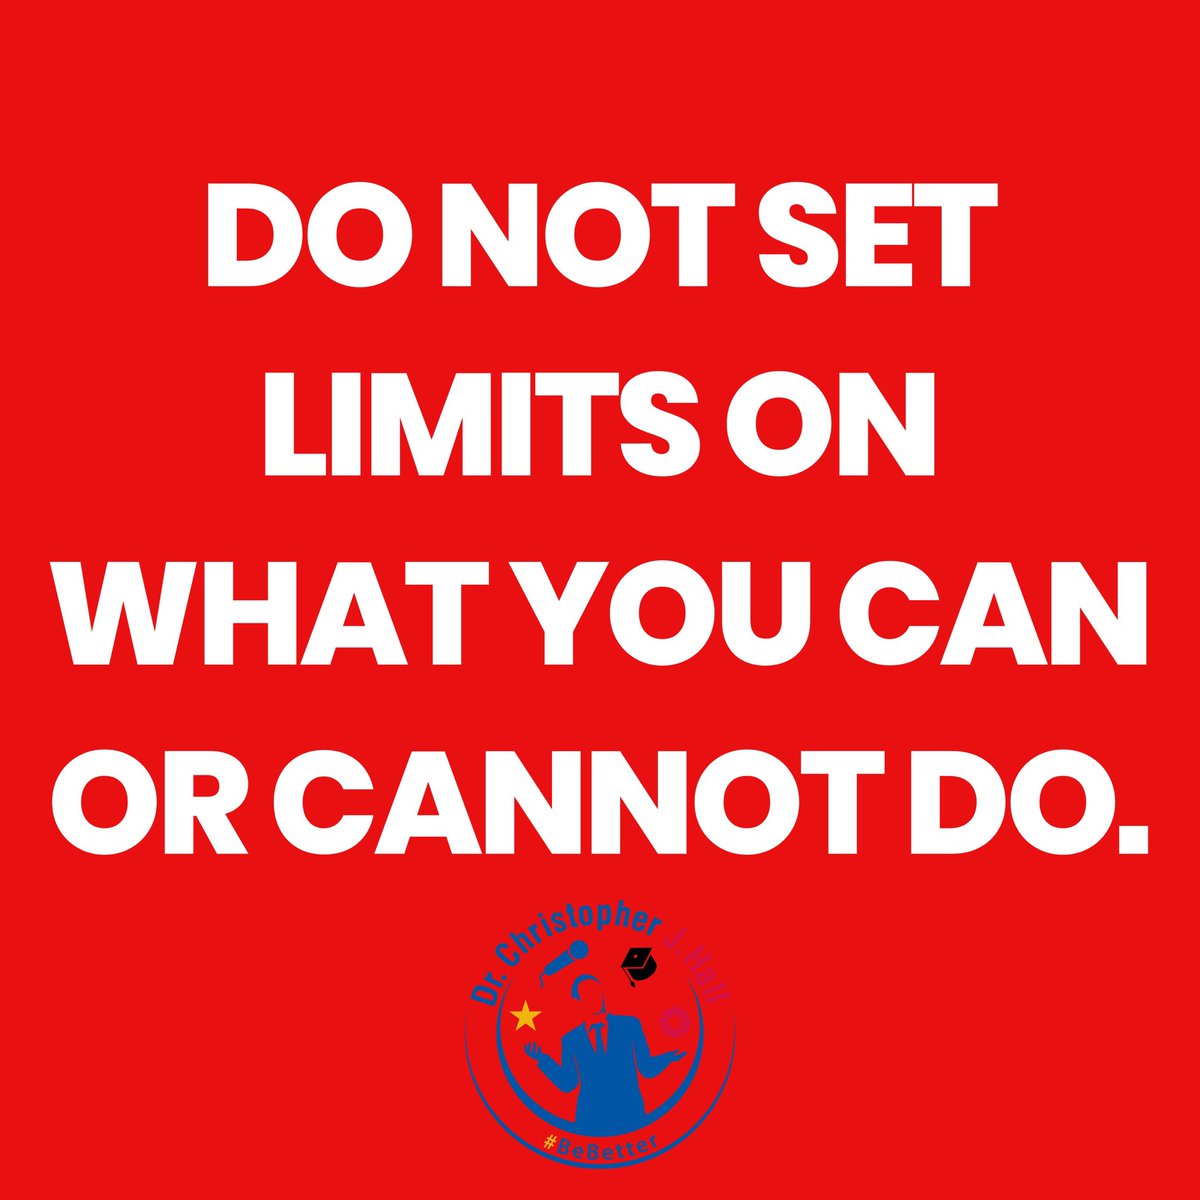 Do not set limits on what you can or cannot do.
.
#limit #limits #nolimits #motivation #lifewithoutlimits #inspiration #lifelesson #fit #fitness #leadership #love #life #noexcuses #stayfocused #BeBetter